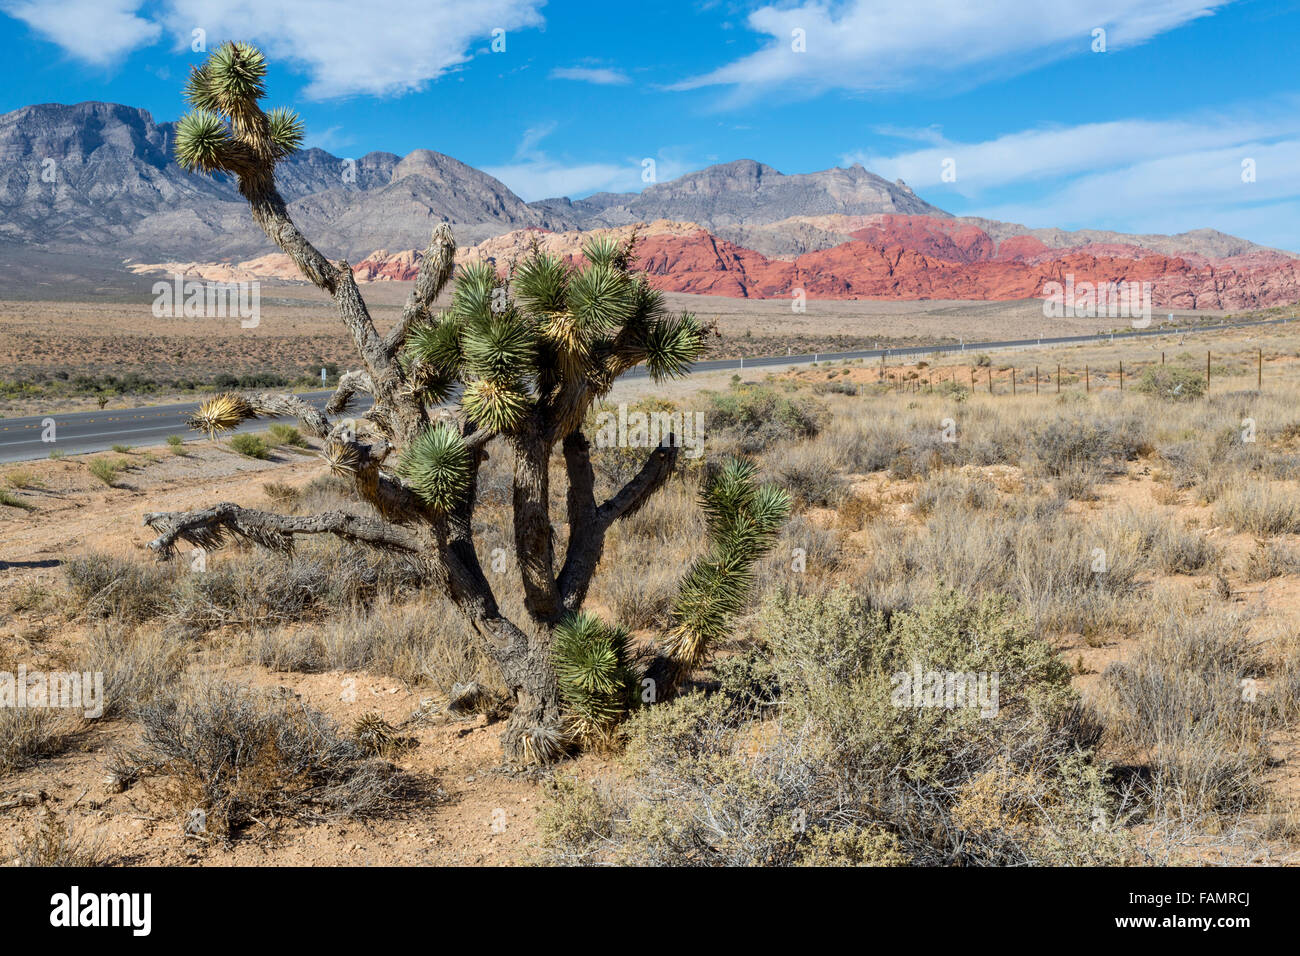 Red Rock Canyon, Nevada.  Joshua Tree (Yucca Brevifolia).  Calico Hills on right, Keystone Thrust in background. Stock Photo